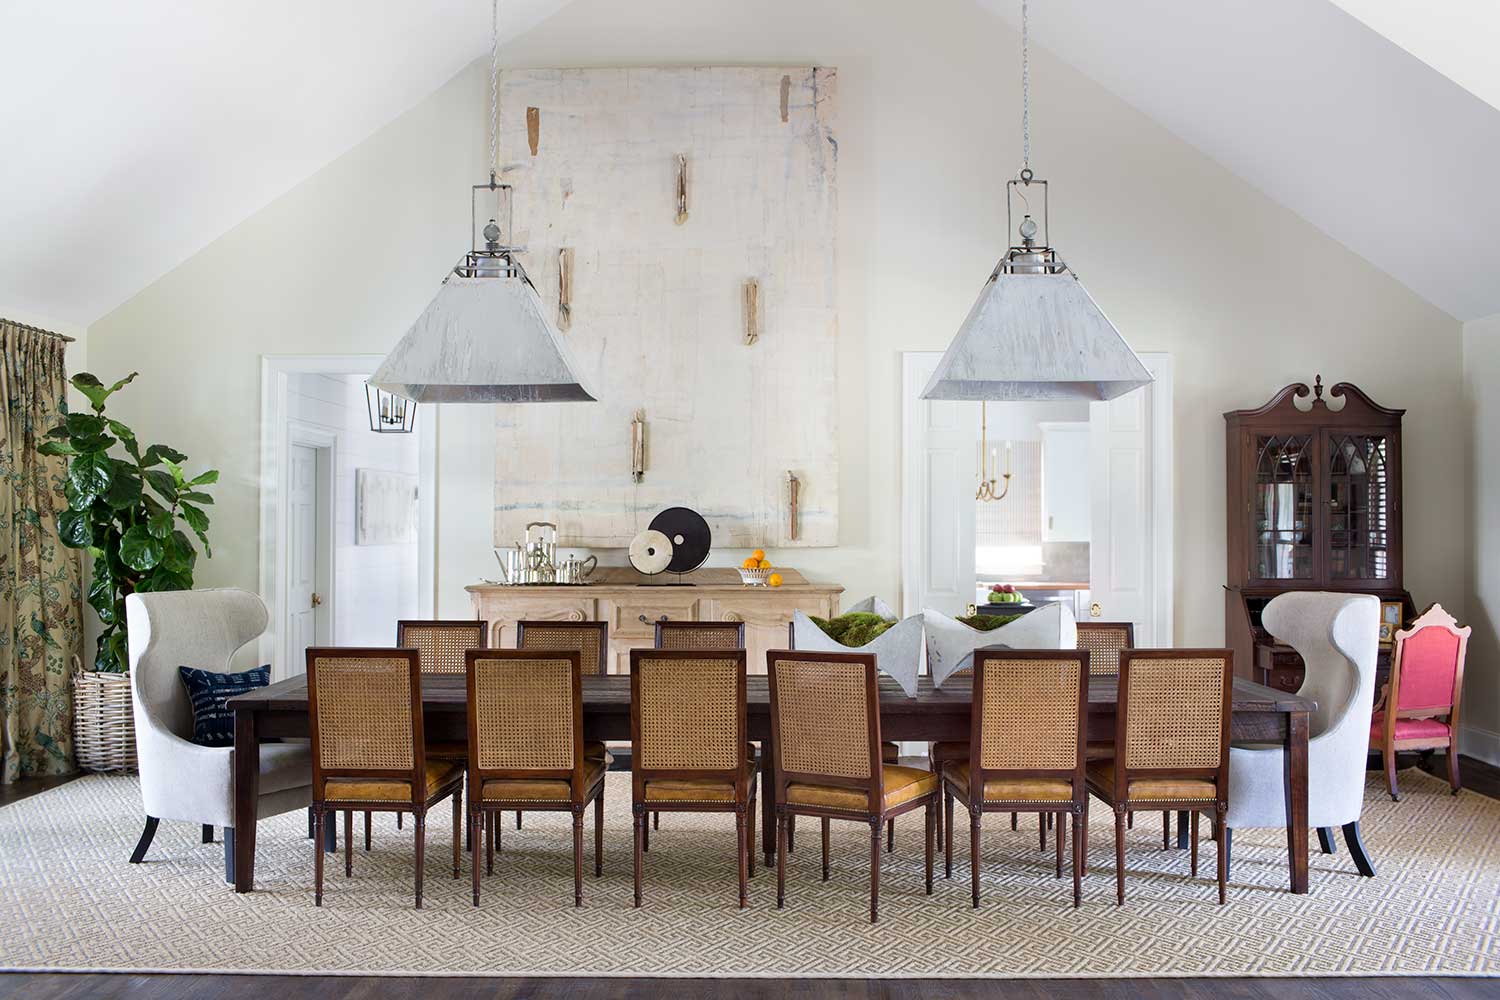 cloud cover by benjamin moore is neutral paint color favorite splashed in a dining room with large table